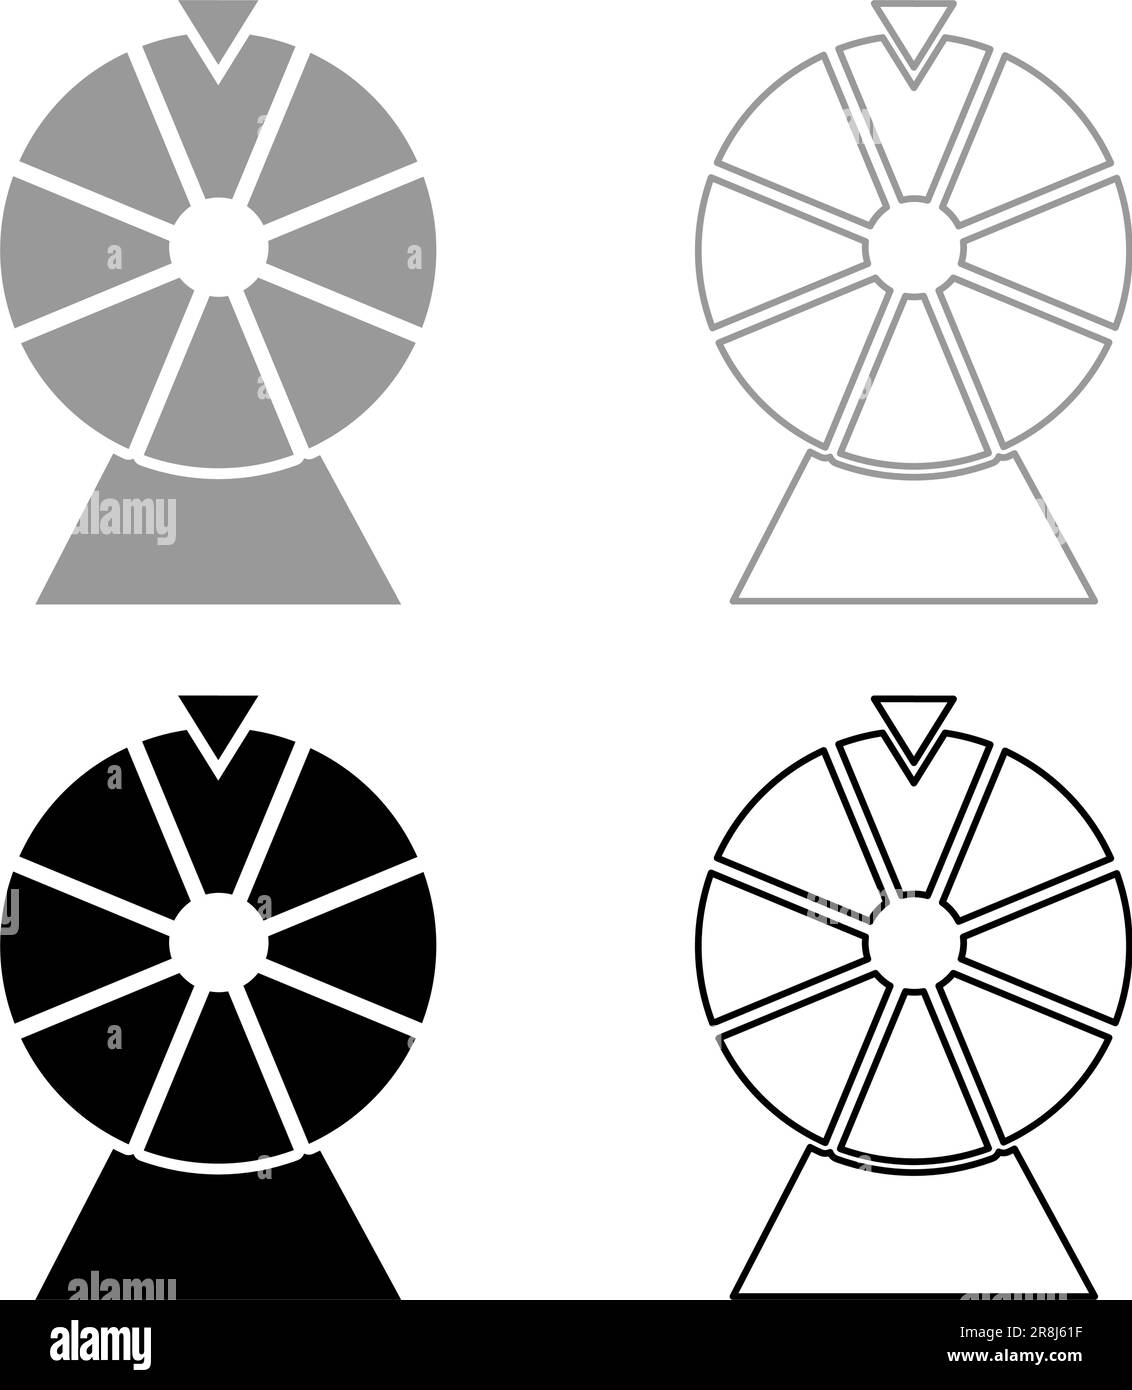 Fortune wheel drum lucky spin game casino gambling winner roulette set icon grey black color vector illustration image simple solid fill outline Stock Vector